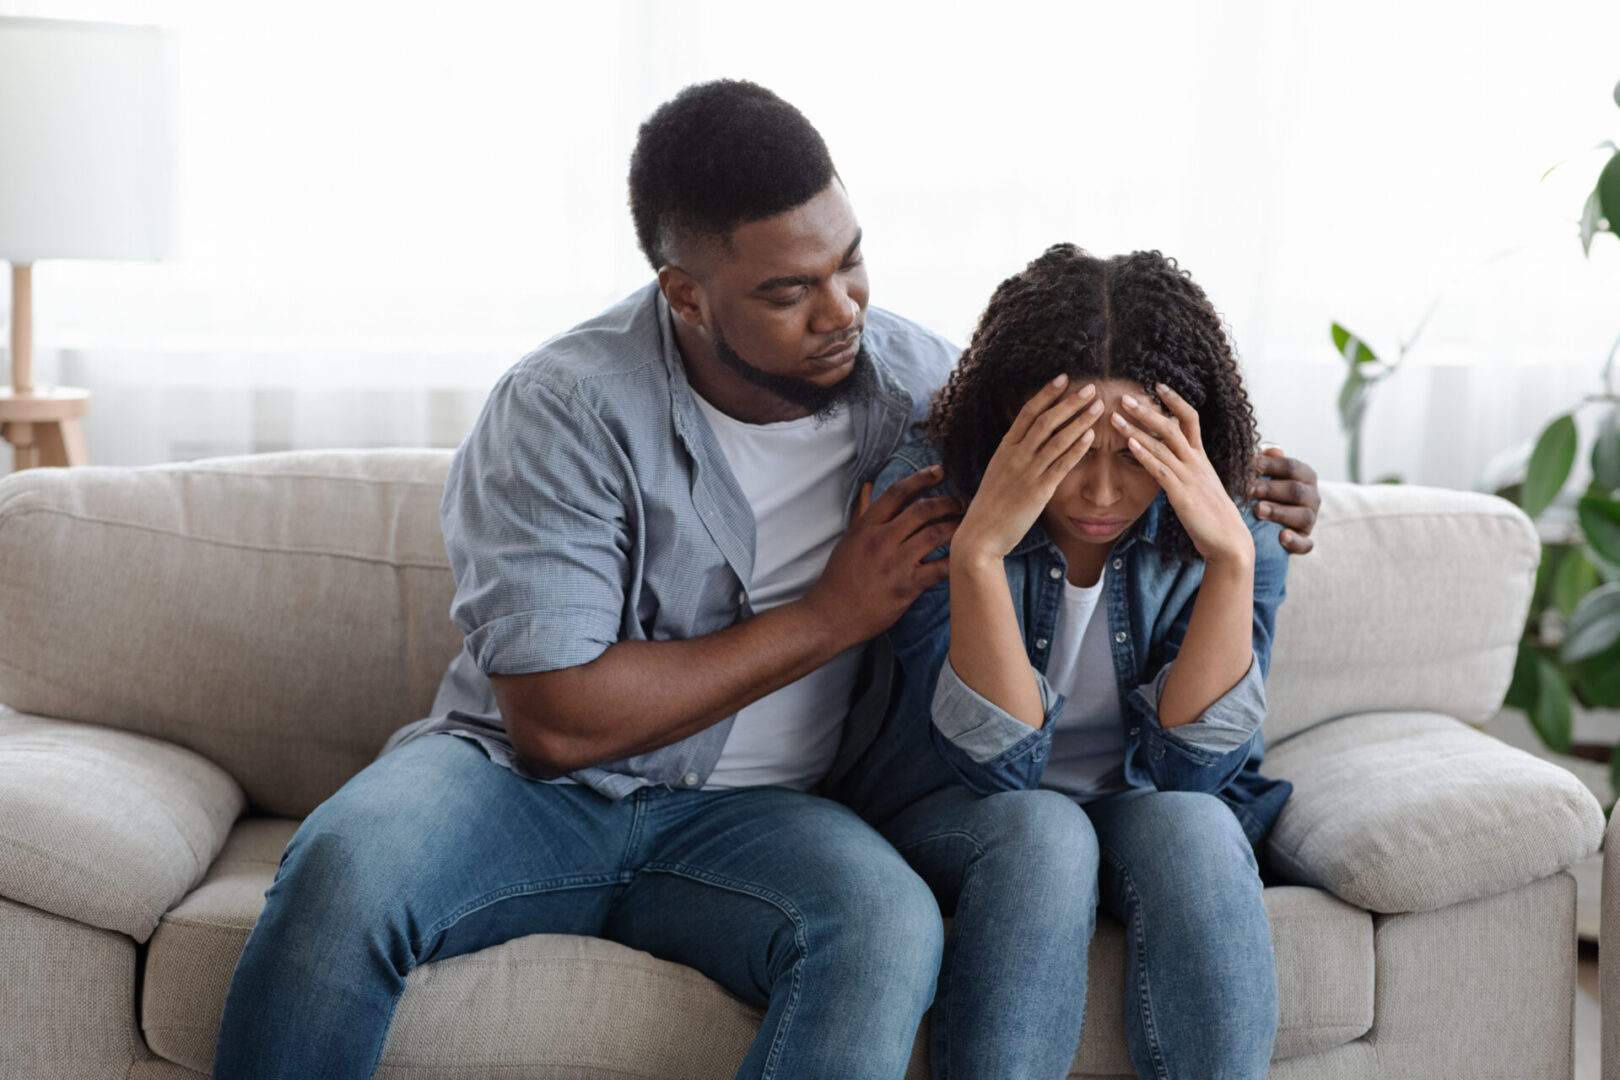 How Traumatic Experiences Can Impact Future Relationships